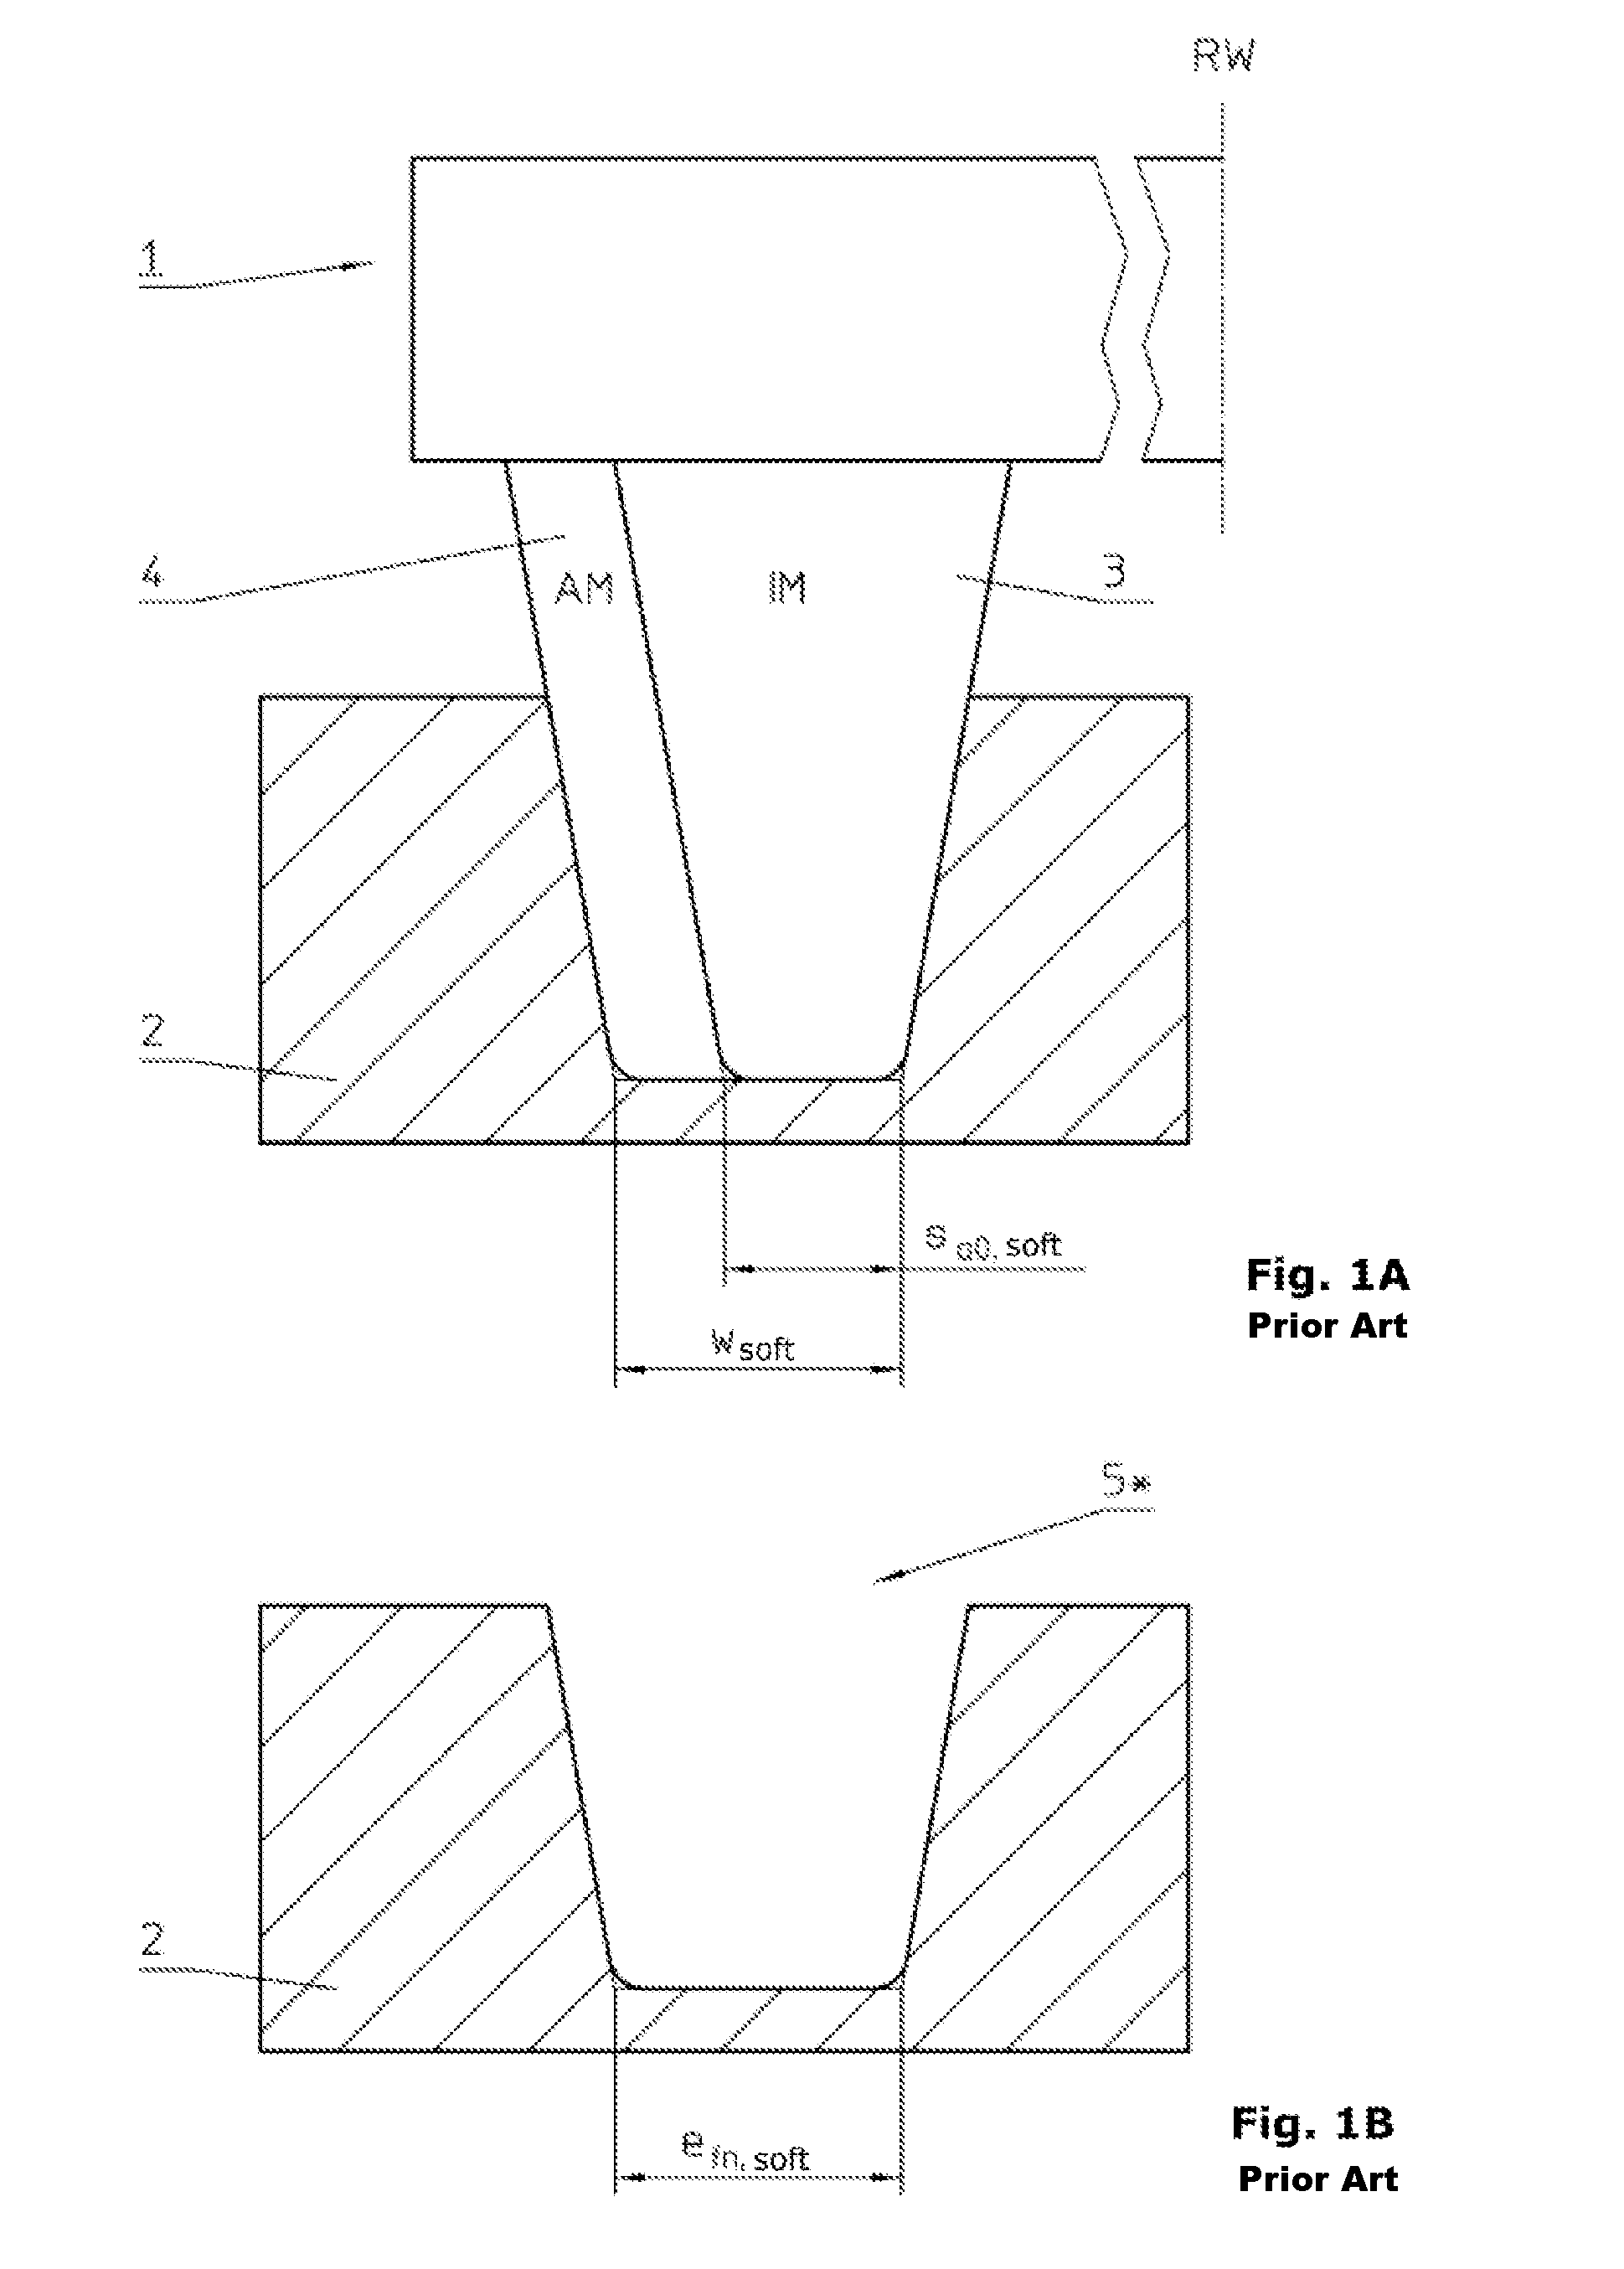 Method for Gear Pre-Cutting of a Plurality of Different Bevel Gears and Use of an According Milling Tool